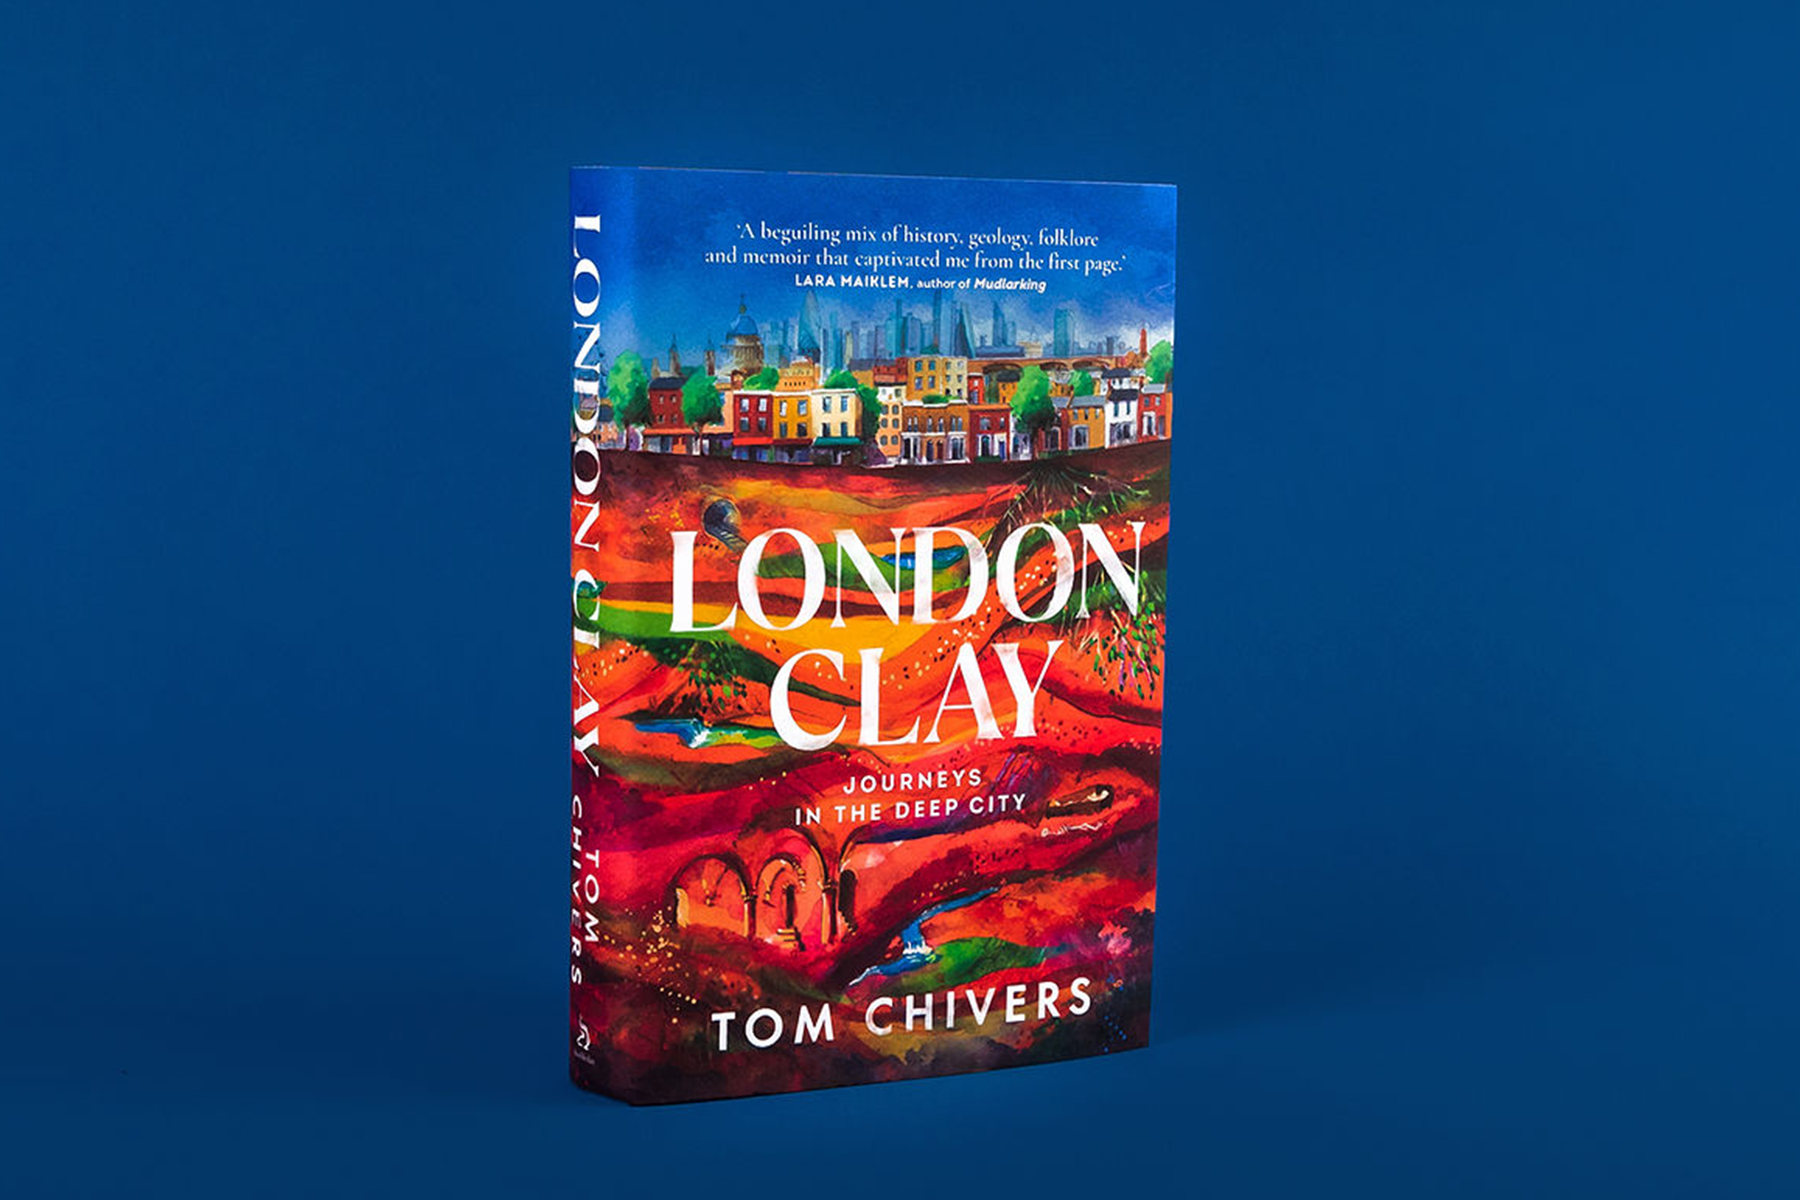 The book London Clay by Tom Chivers, photographed against a blue background.